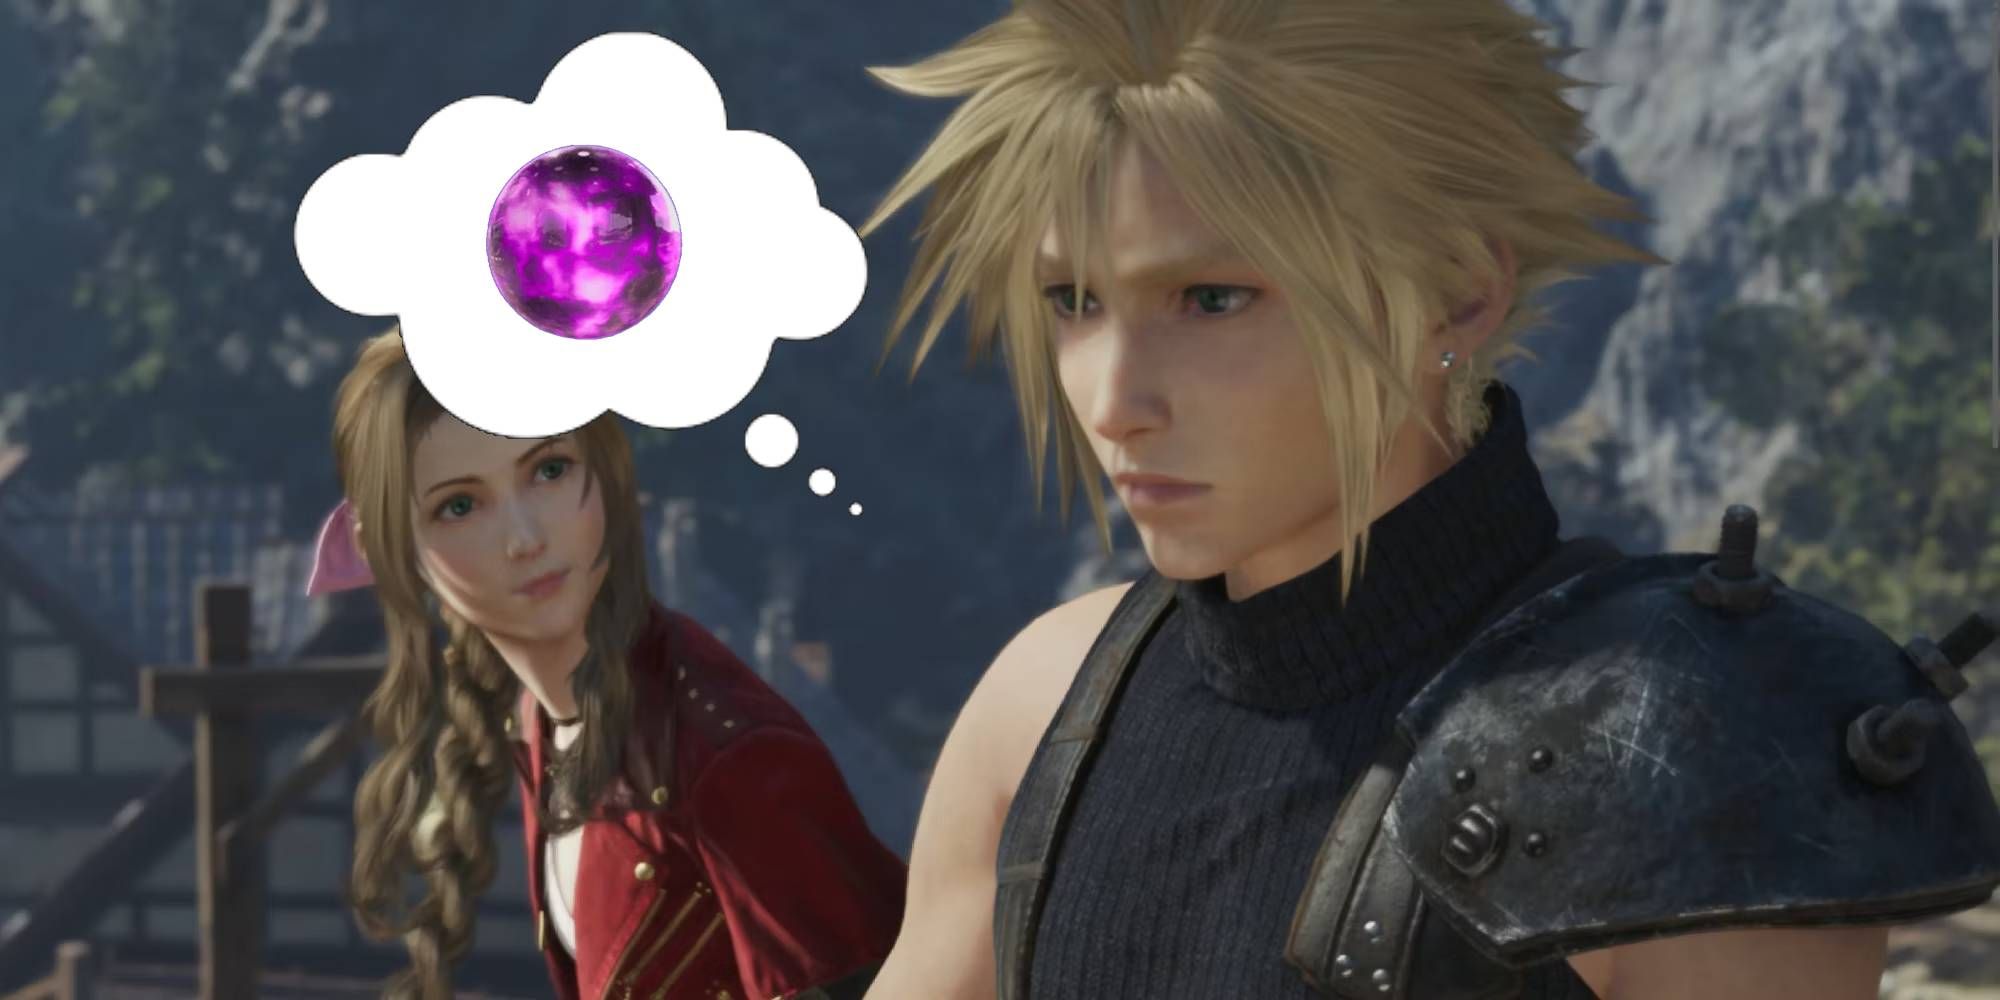 cloud thinking about materia thegamer heading image